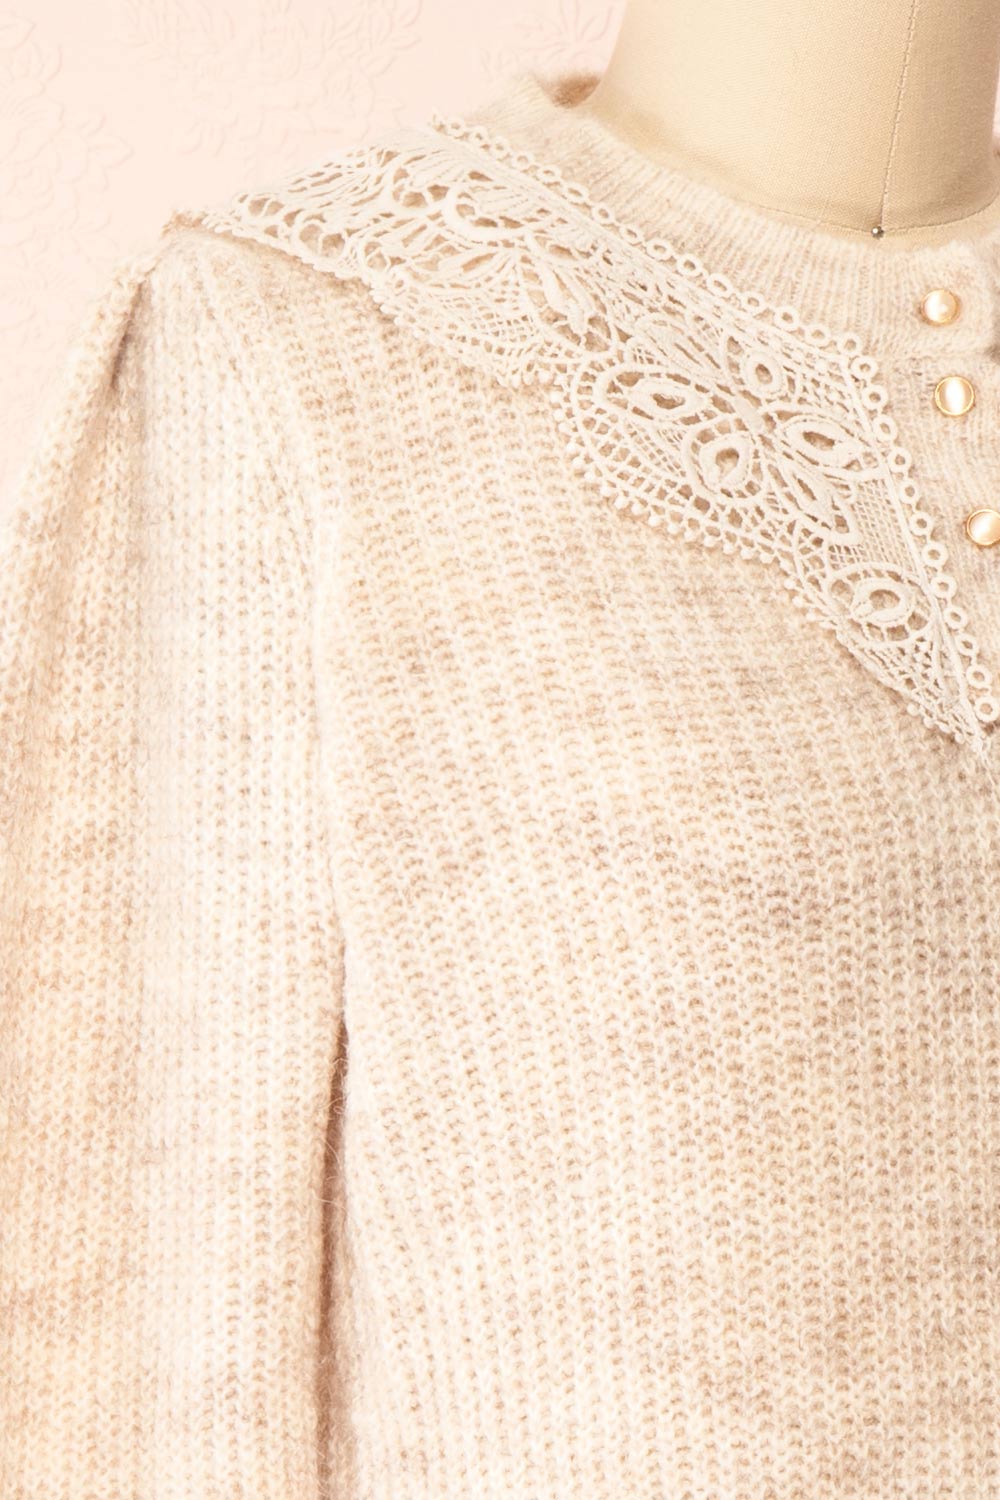 Reagan Beige Buttoned Collar Sweater w/ Lace | Boutique 1861 side close-up